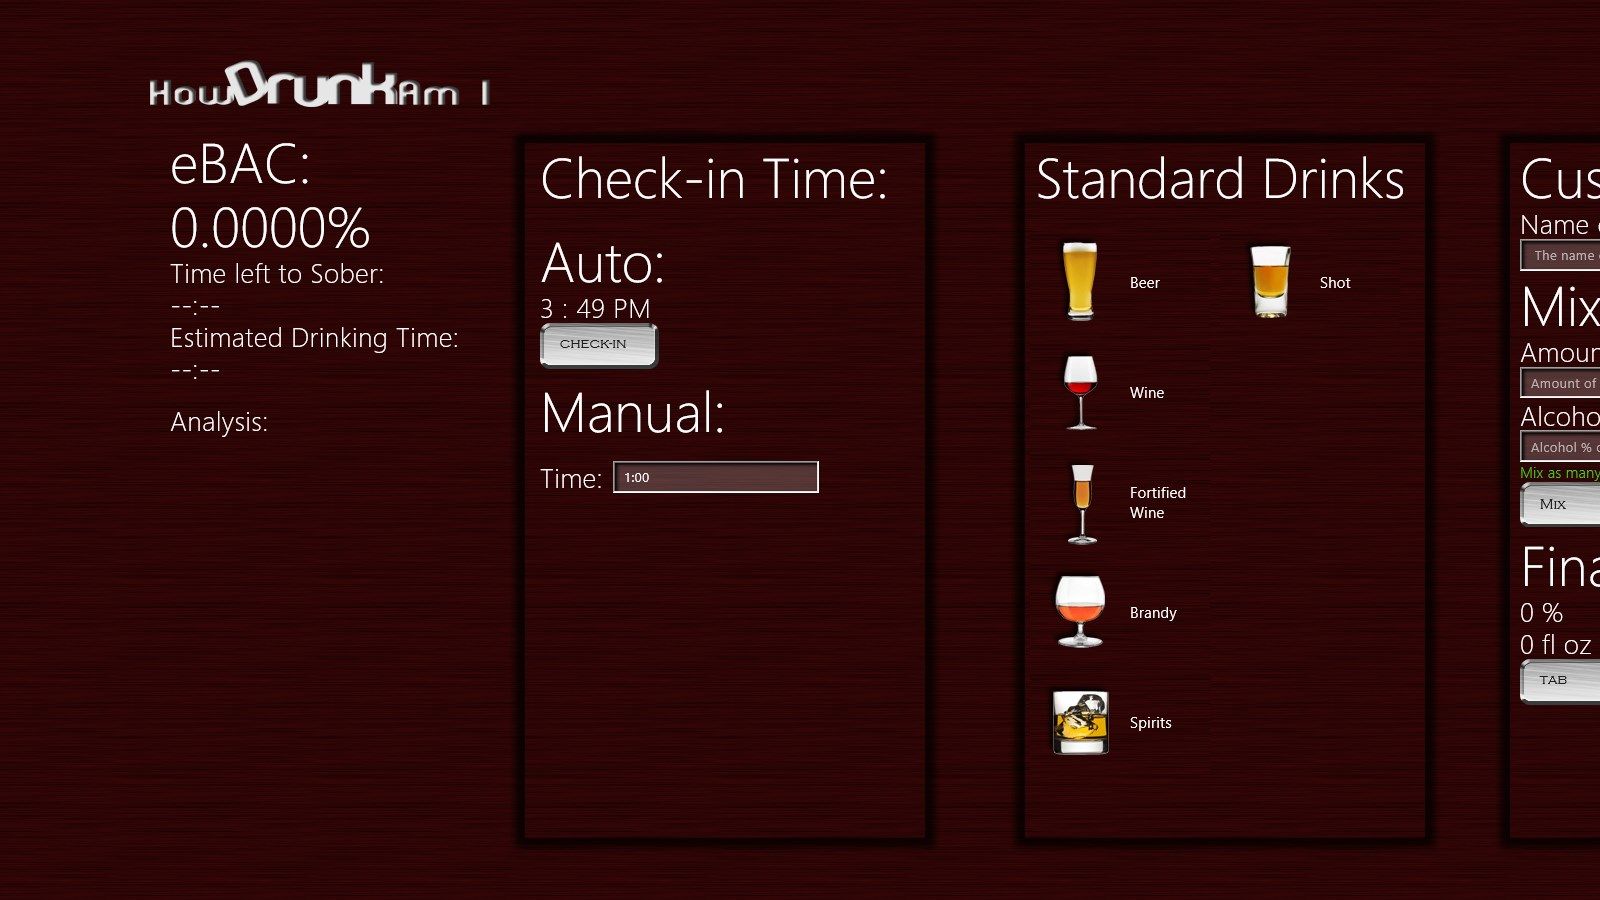 Check in or enter a time to set your estimated drinking time